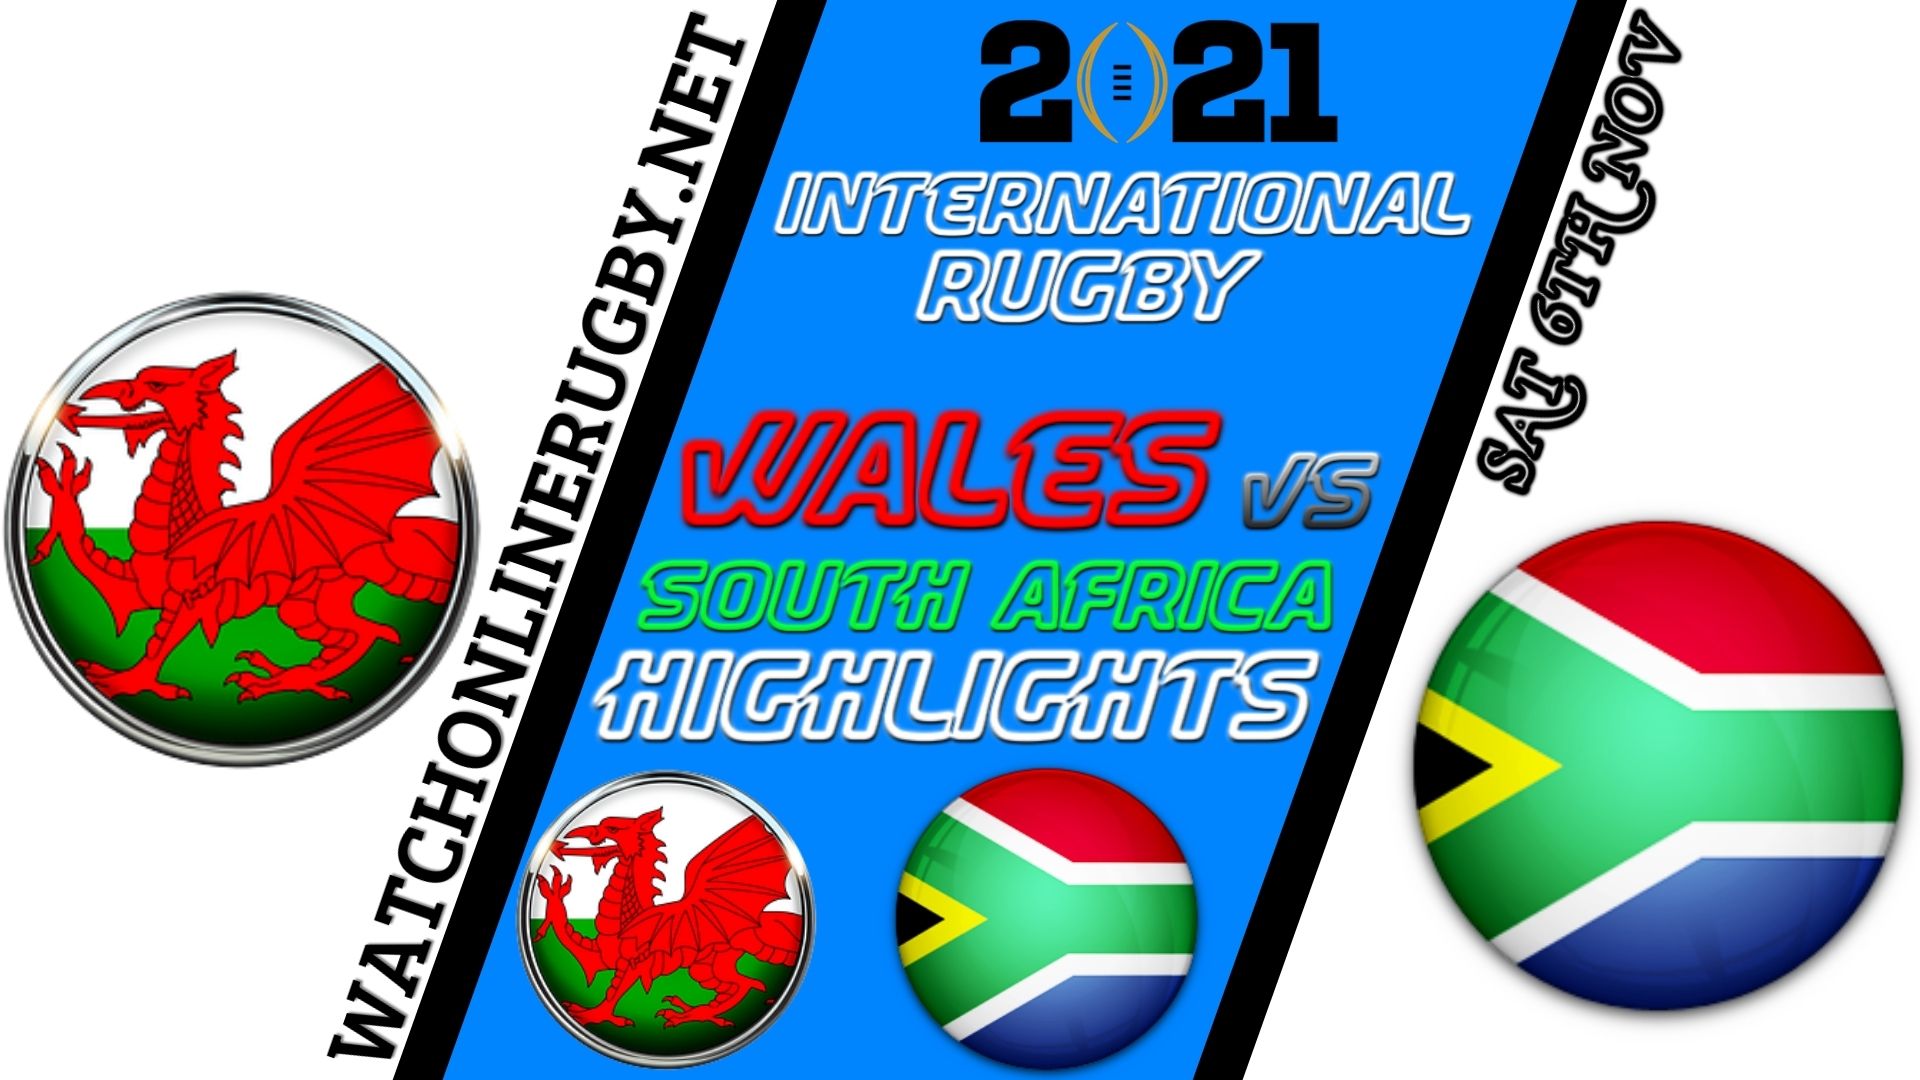 Wales Vs South Africa International Rugby 2021